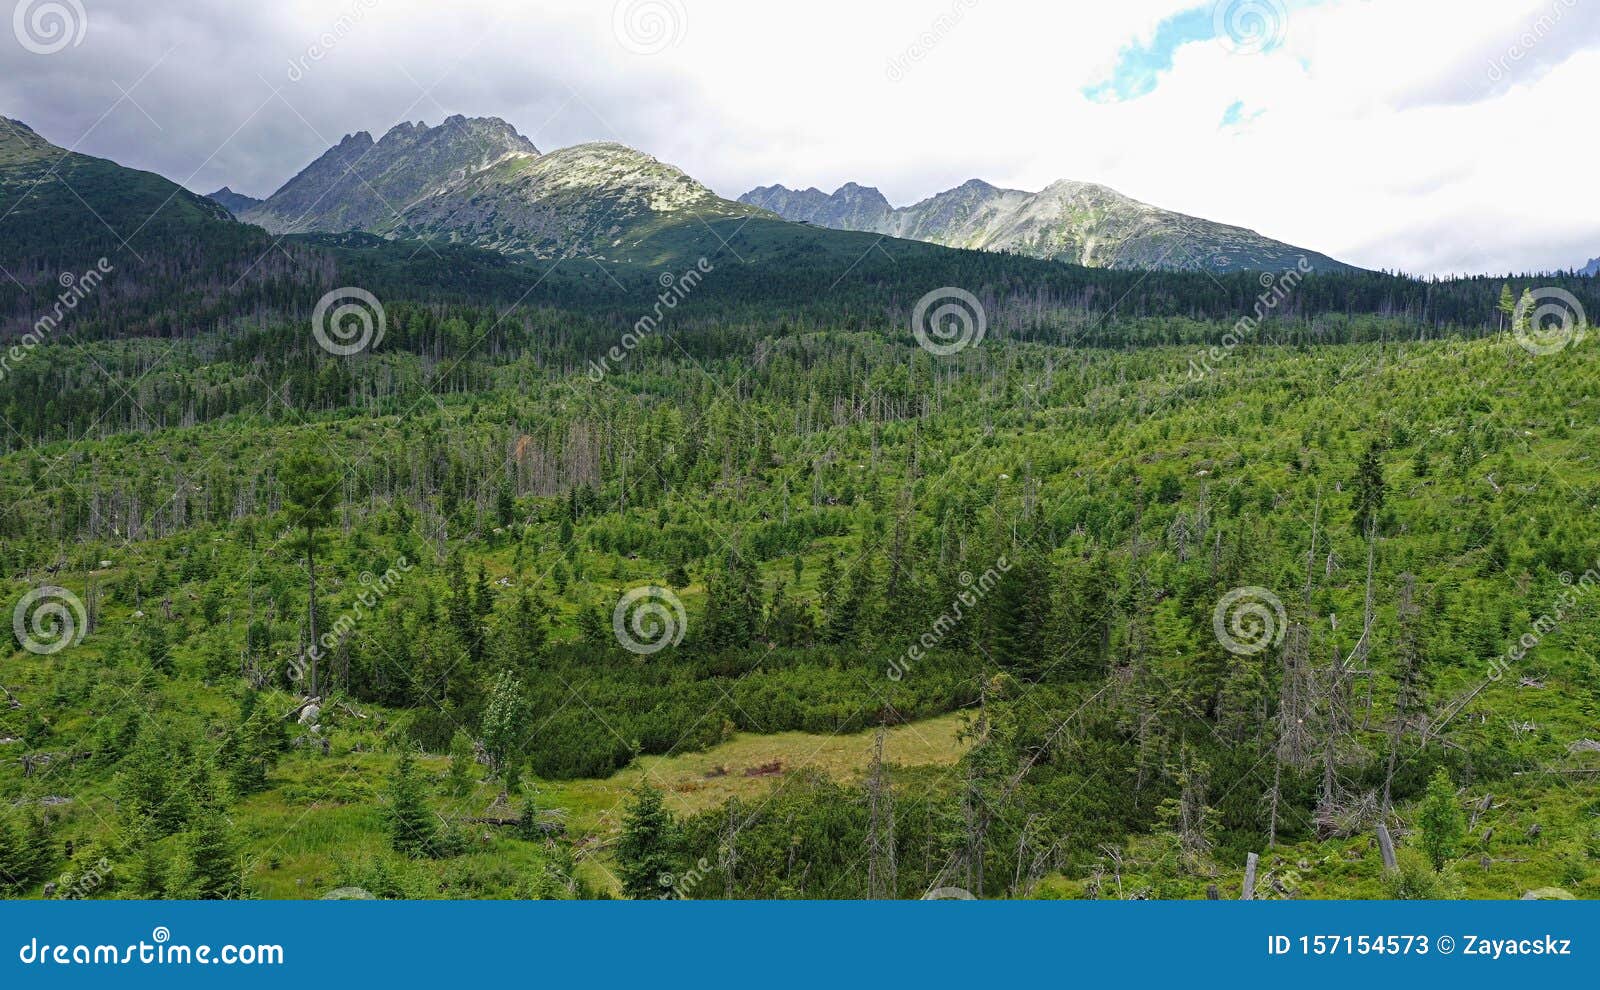 aerial view of forest under high tatras mountains recovering after disastrous windstorm